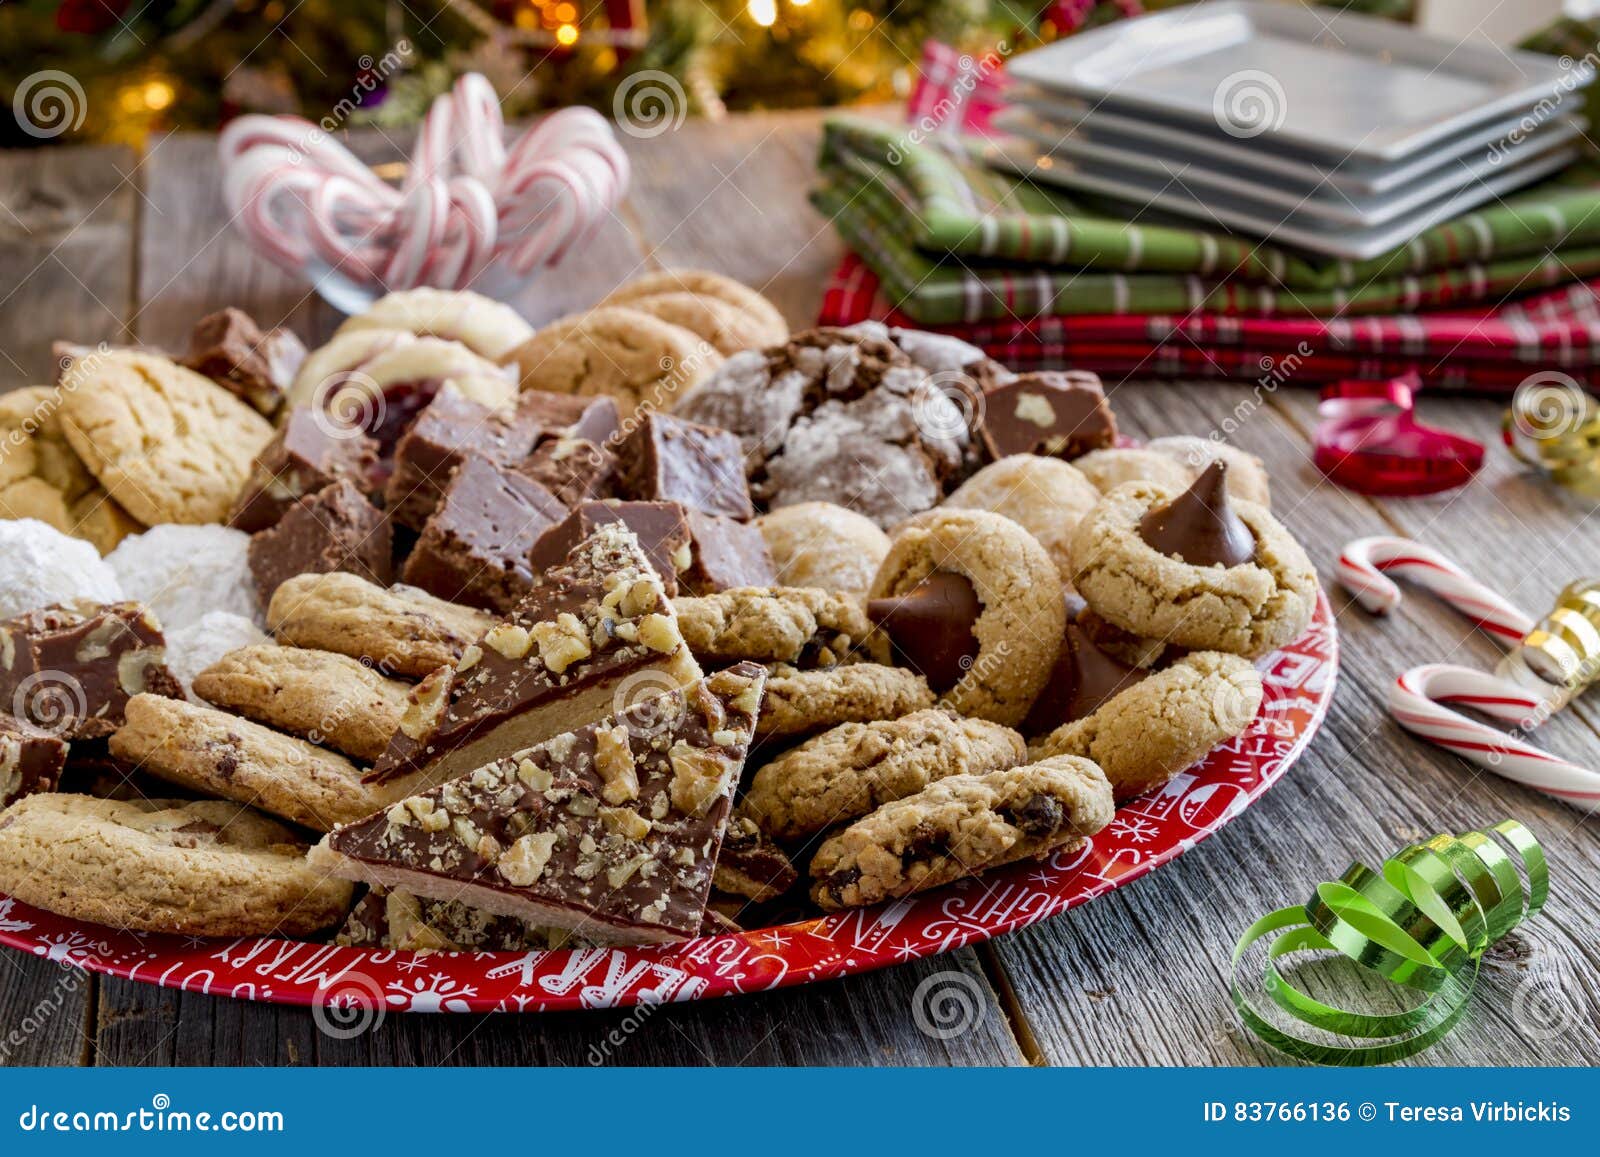 holiday cookie gift tray with assorted baked goods